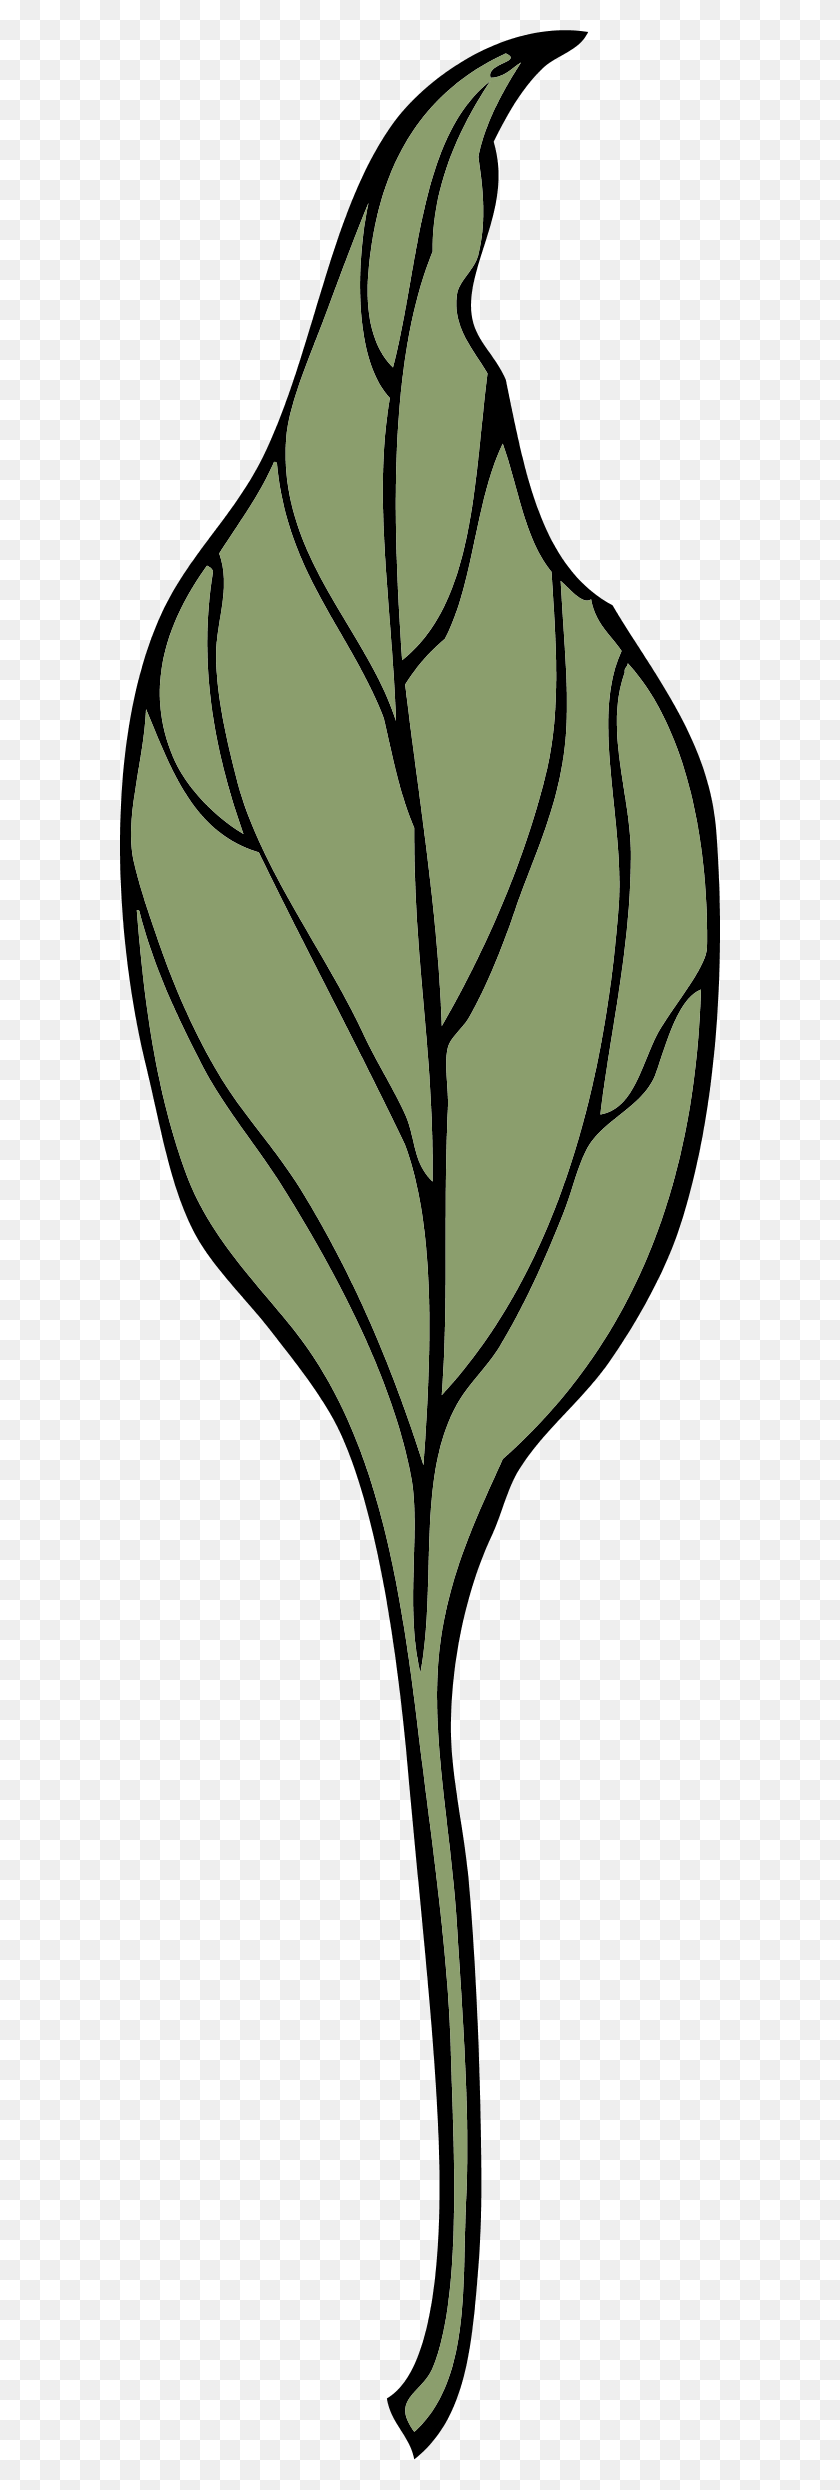 600x2430 Ivy Leaf Clipart - Ivy Clipart